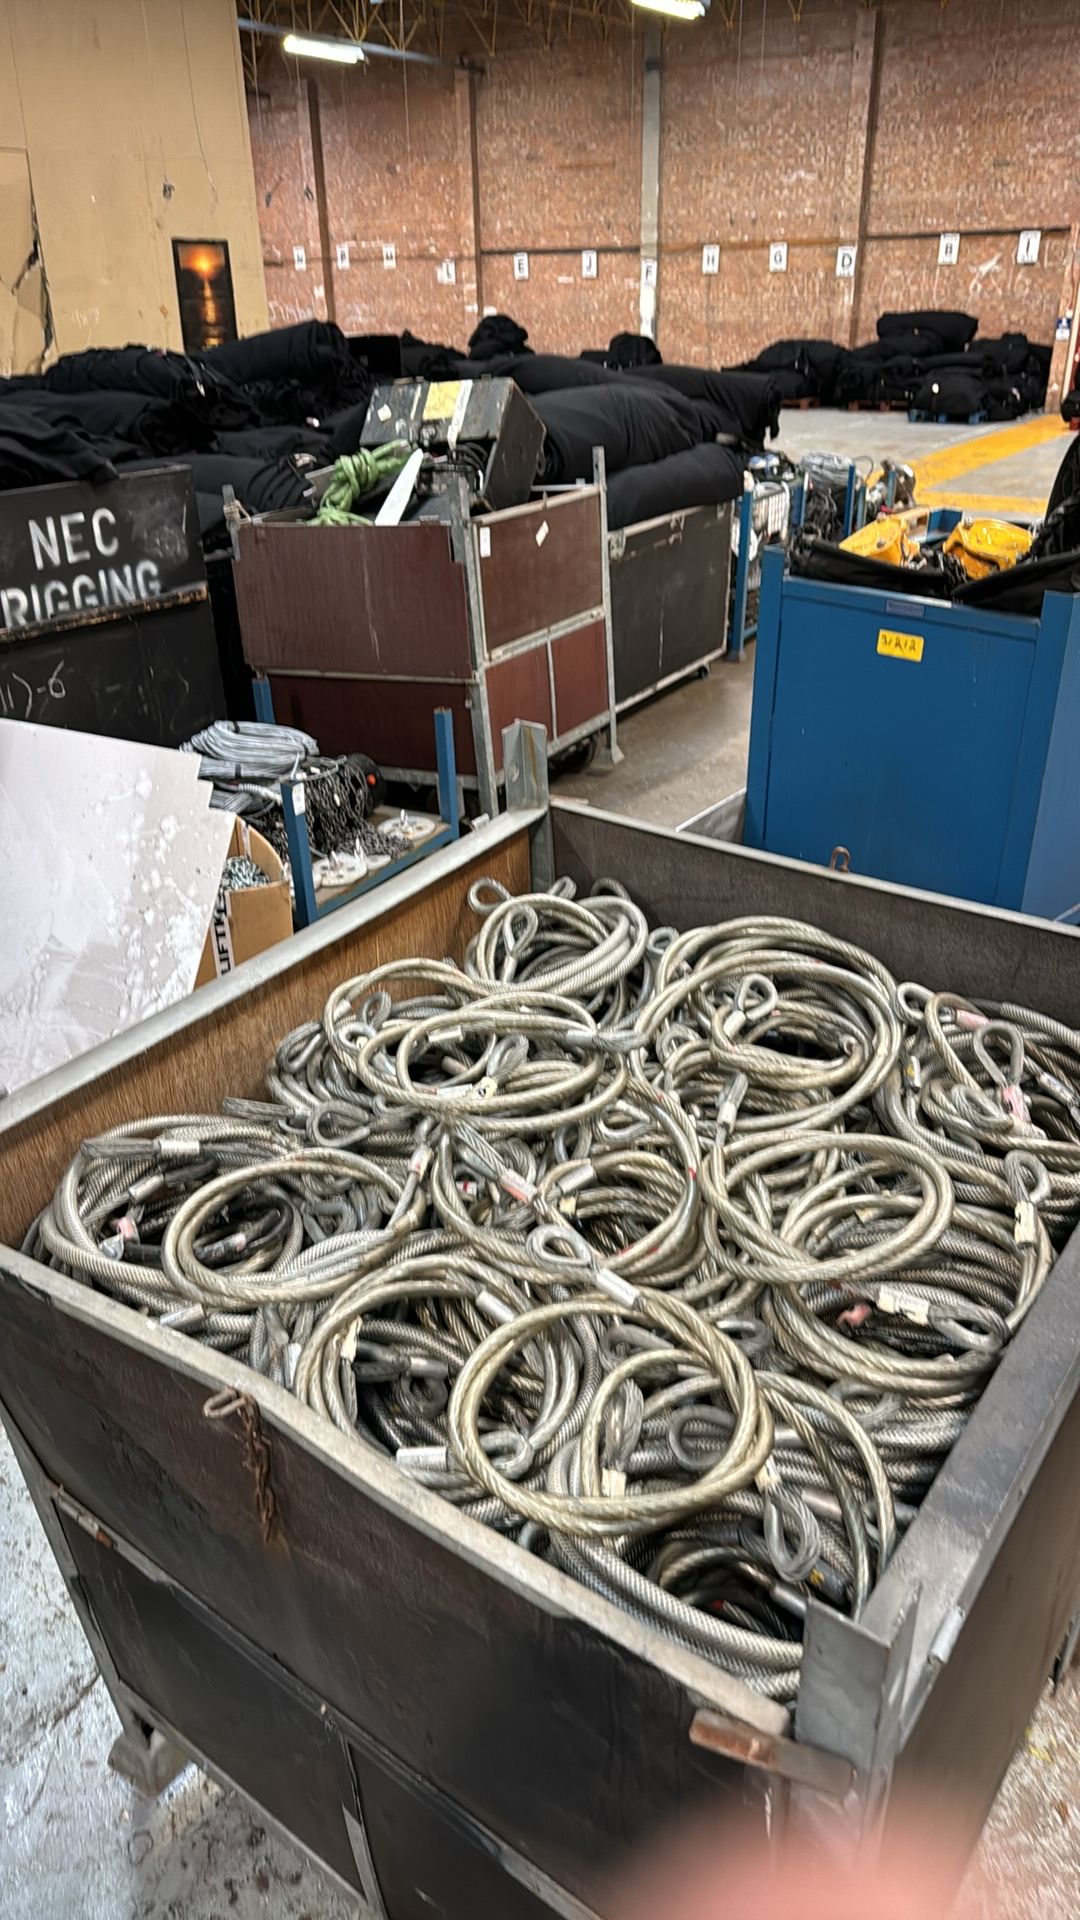 Crate, full of industrial rigging wire - Image 5 of 10